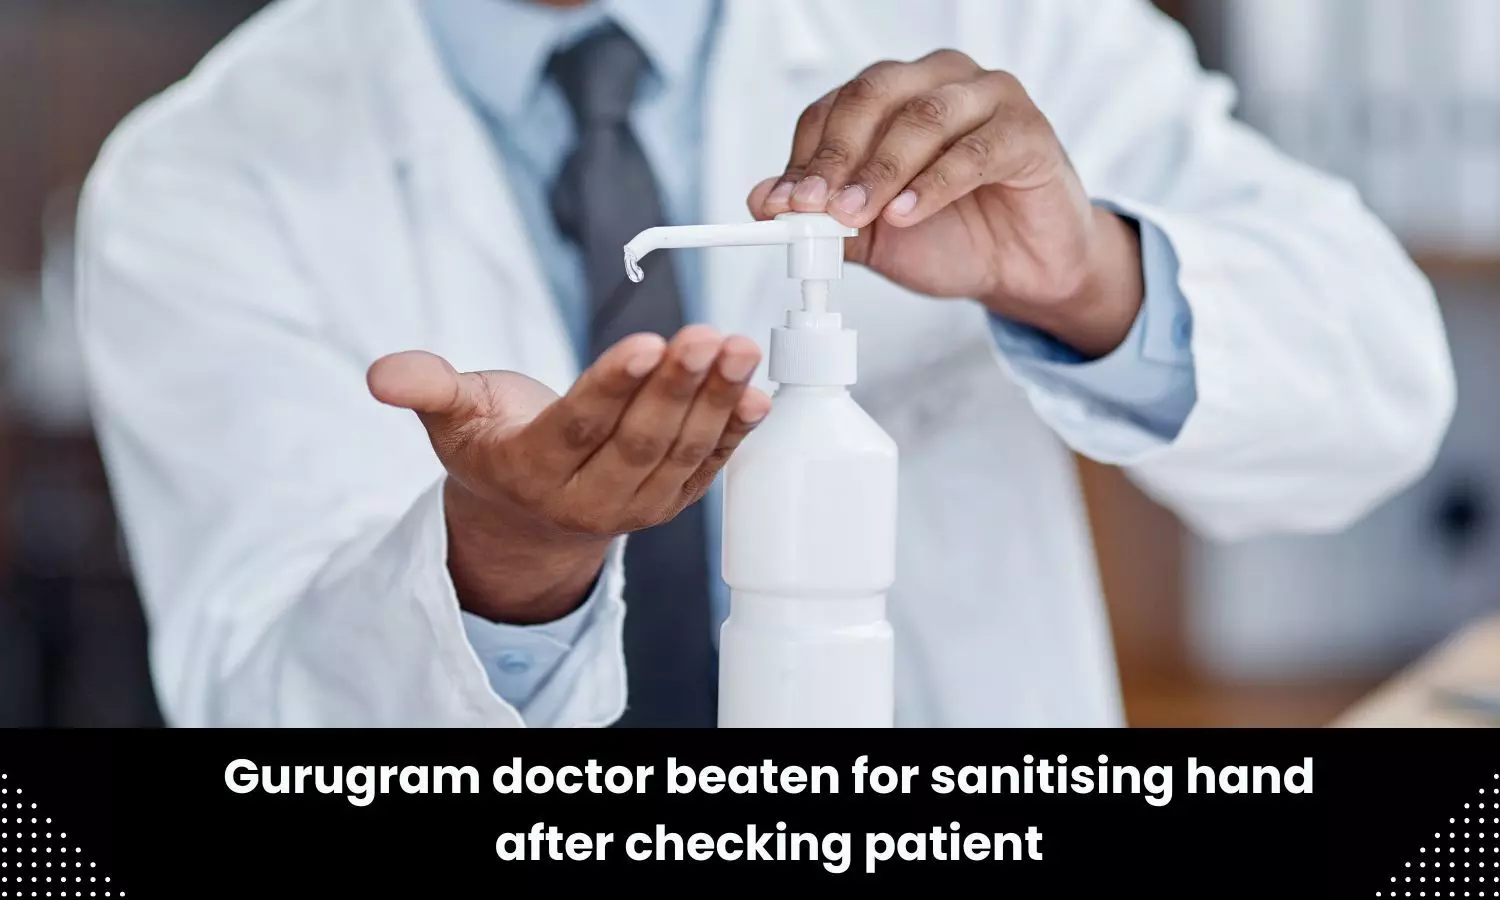 Doctor allegedly assaulted for sanitising hands after examining patient, 2 booked